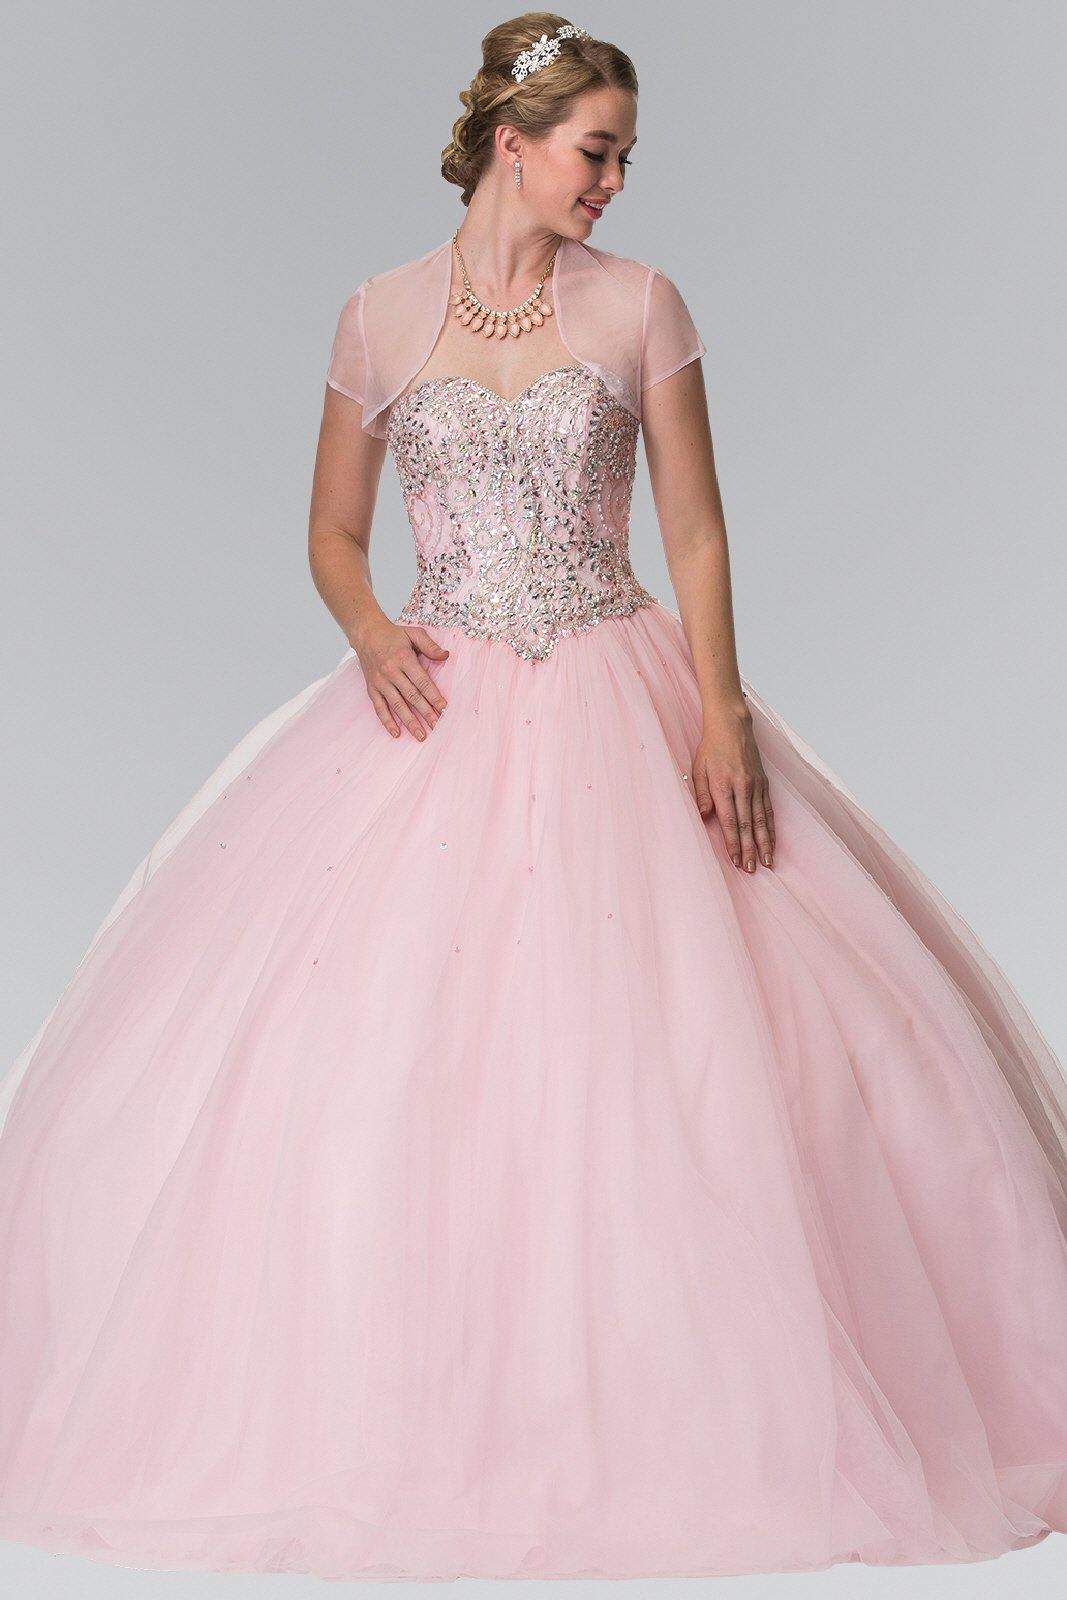 Long Quinceanera Dress Beaded Details with Matching Bolero - The Dress Outlet Elizabeth K